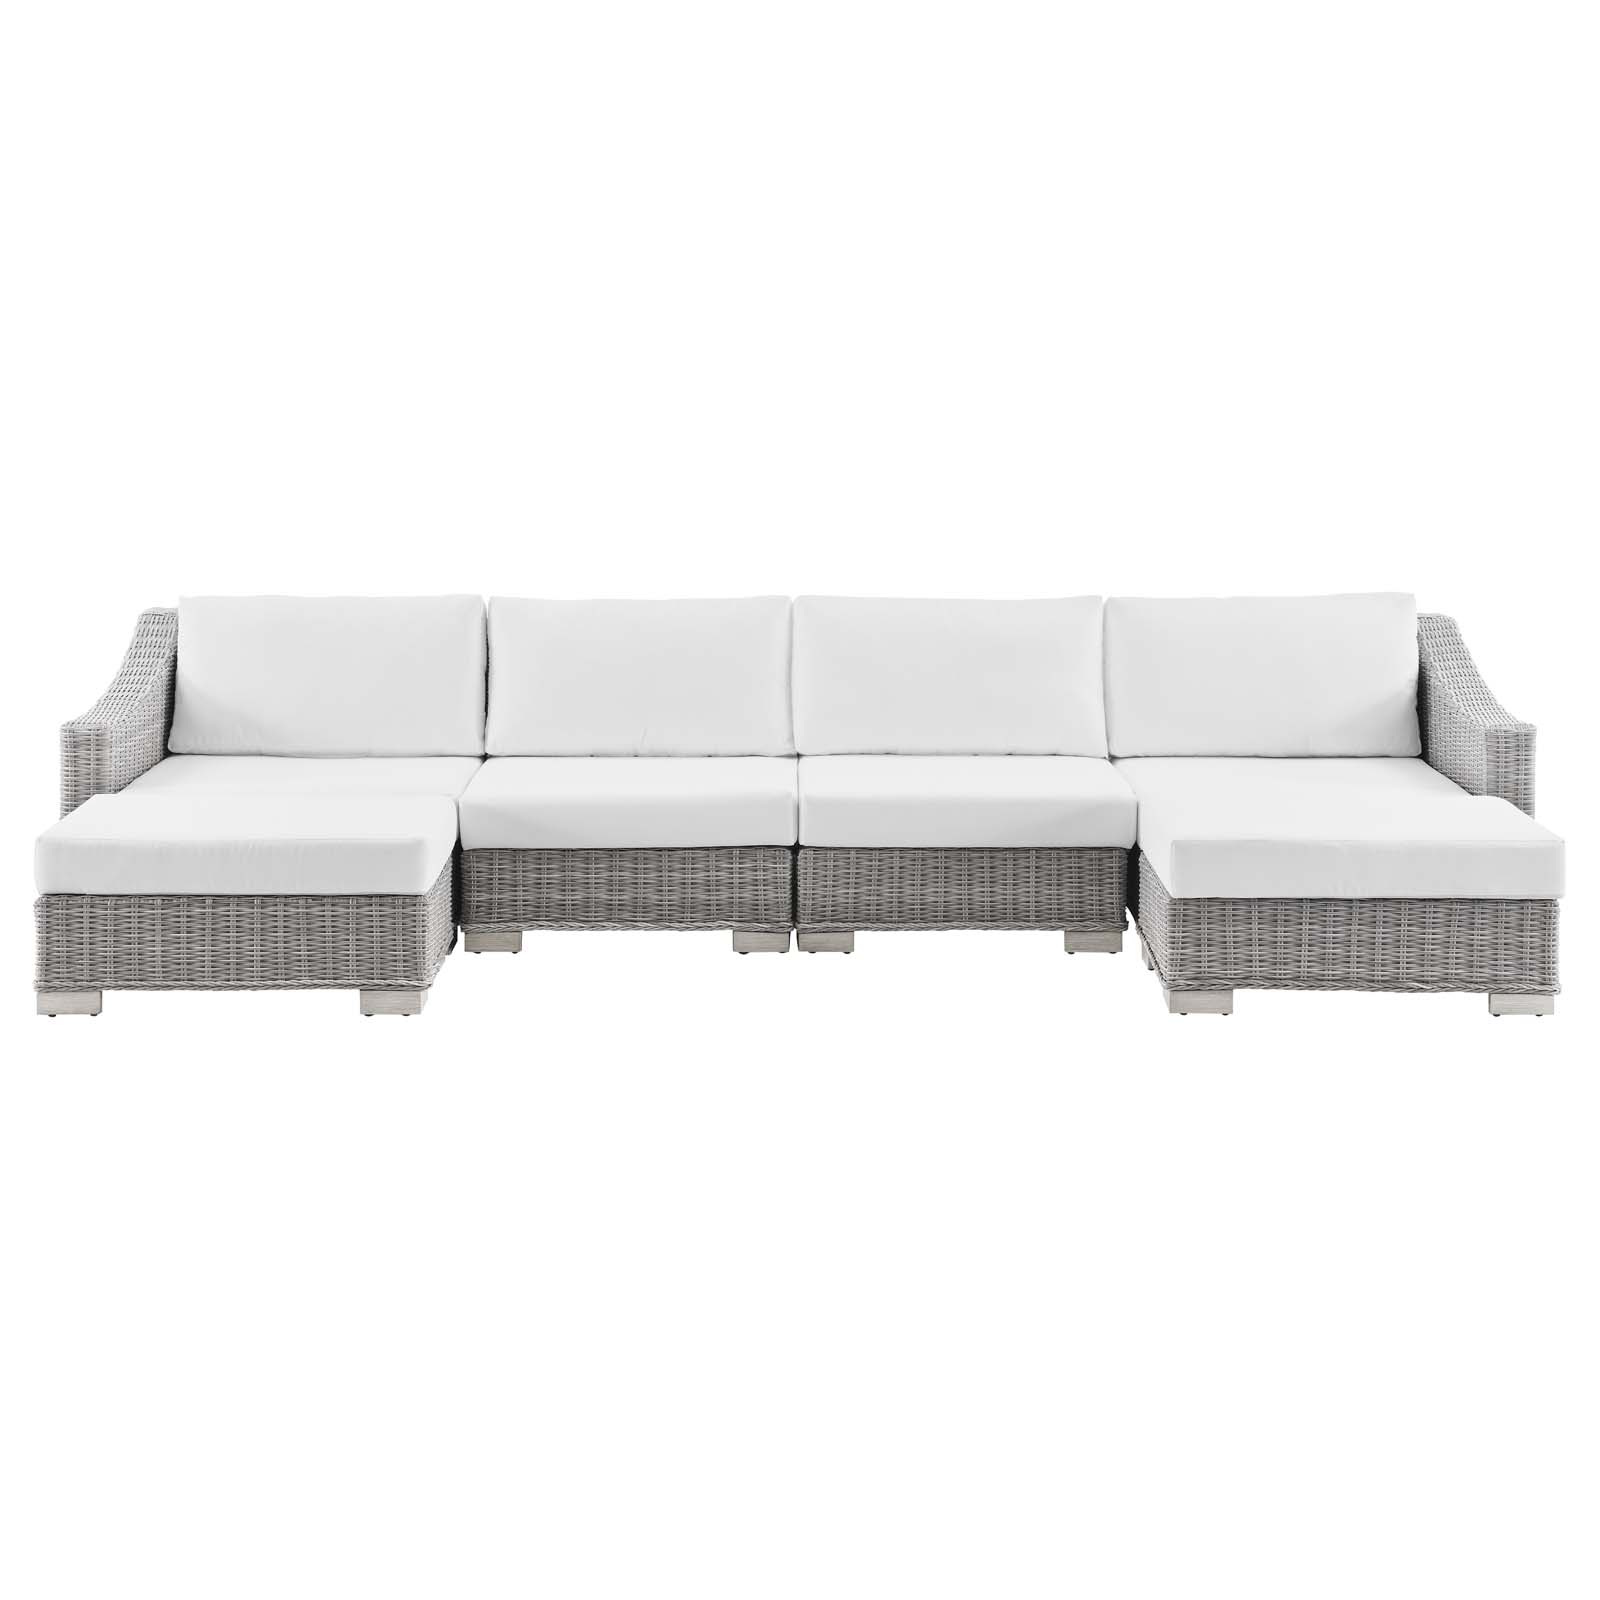 Lounge Sectional Sofa Chair Set, Rattan, Wicker, Light Grey Gray White, Modern Contemporary Urban Design, Outdoor Patio Balcony Cafe Bistro Garden Furniture Hotel Hospitality - image 1 of 10